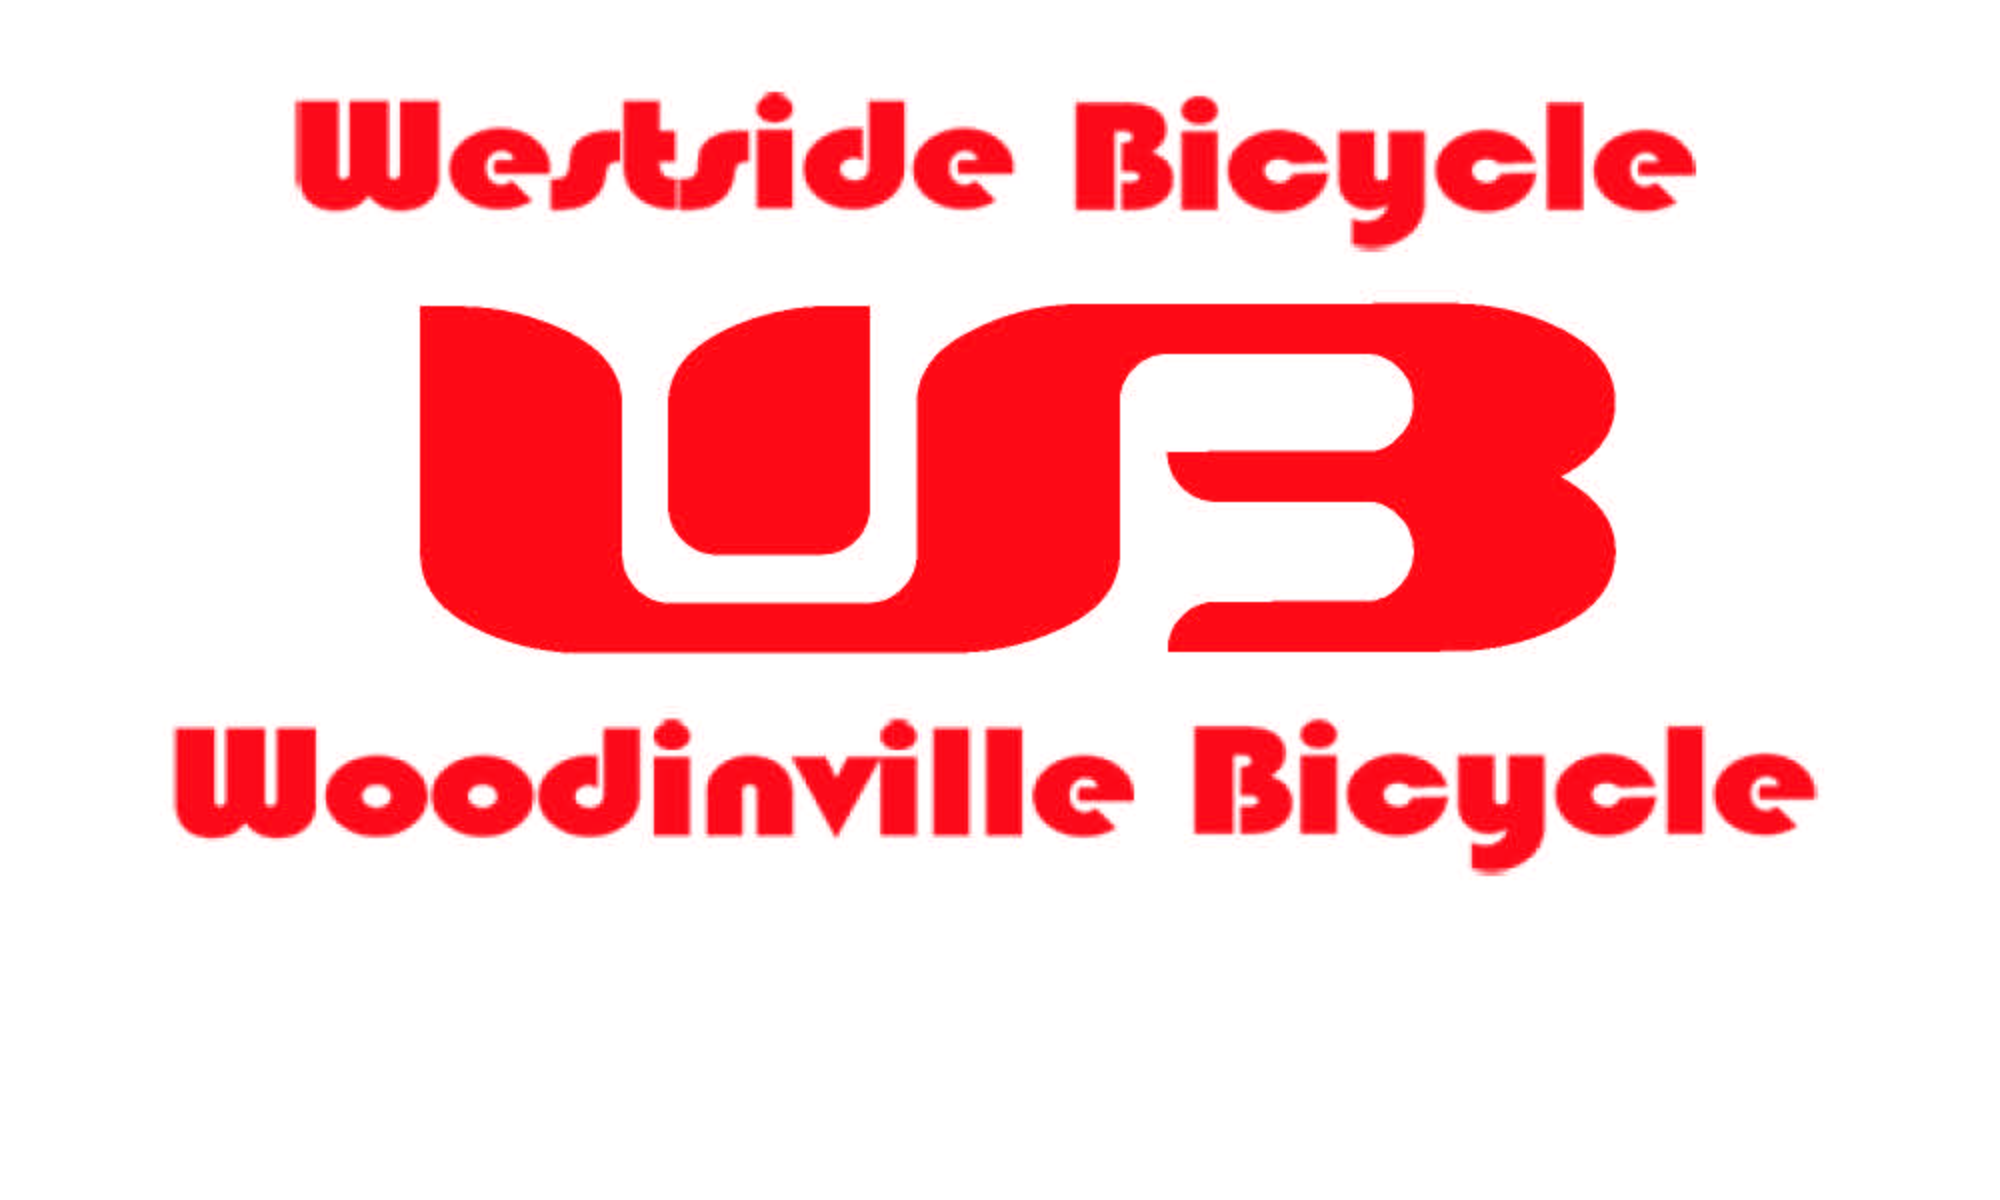 Westside/ Woodinville Bicycle